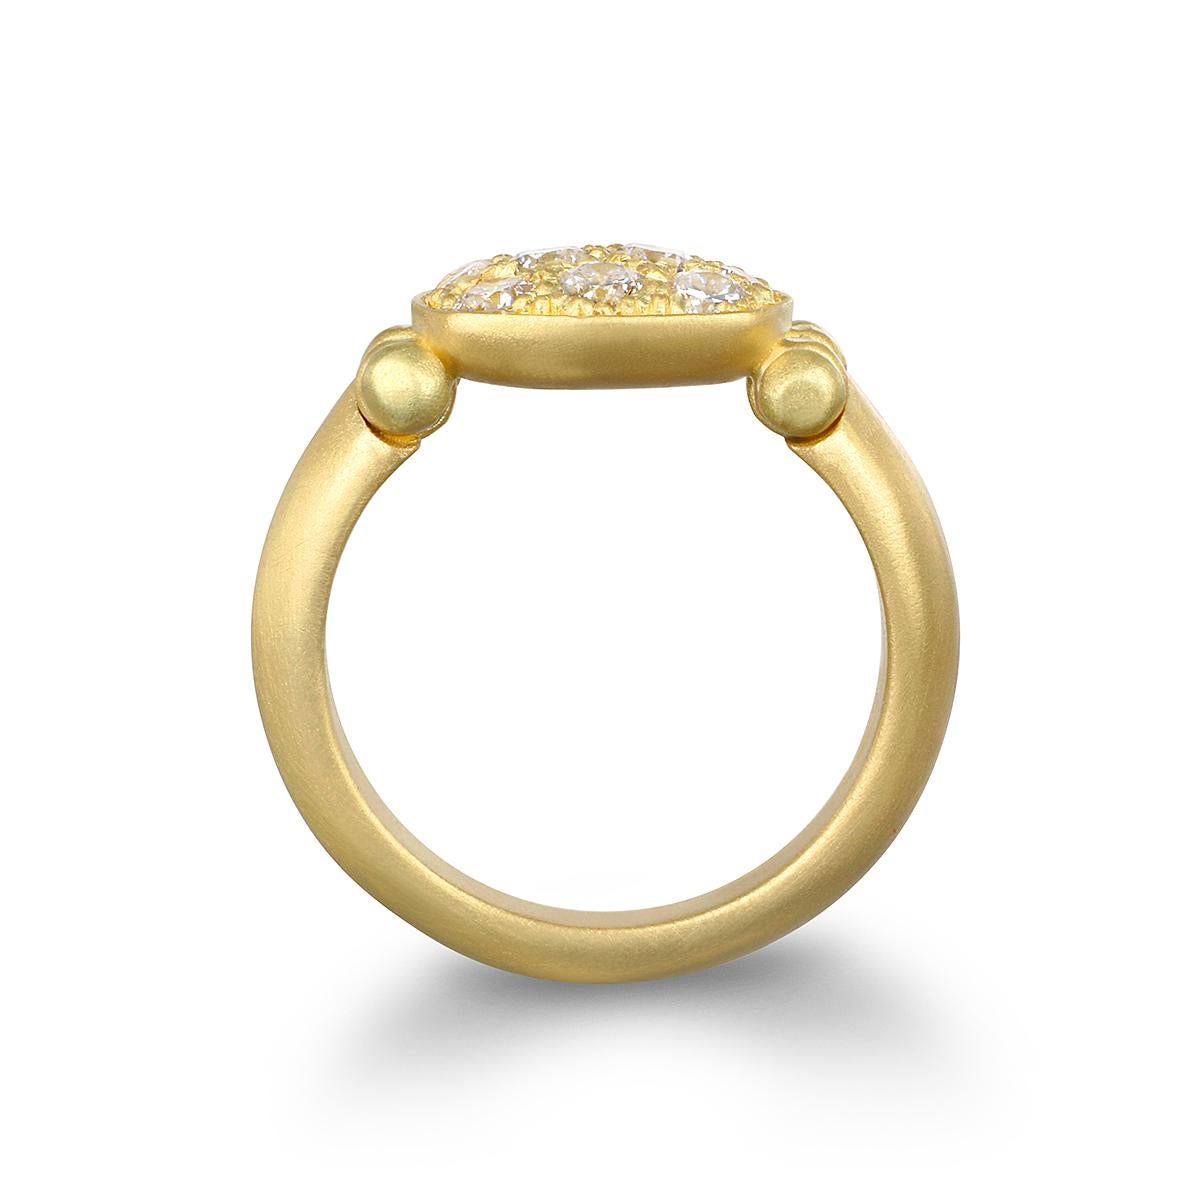 A modern-day take on the Signet Ring, Faye Kim's 18 Karat Gold Diamond Hinged Chiclet Ring sparkles with bright, white pave diamonds. With its flattering chiclet or antique cushion shape, it's a great look worn on any finger and can be stacked with